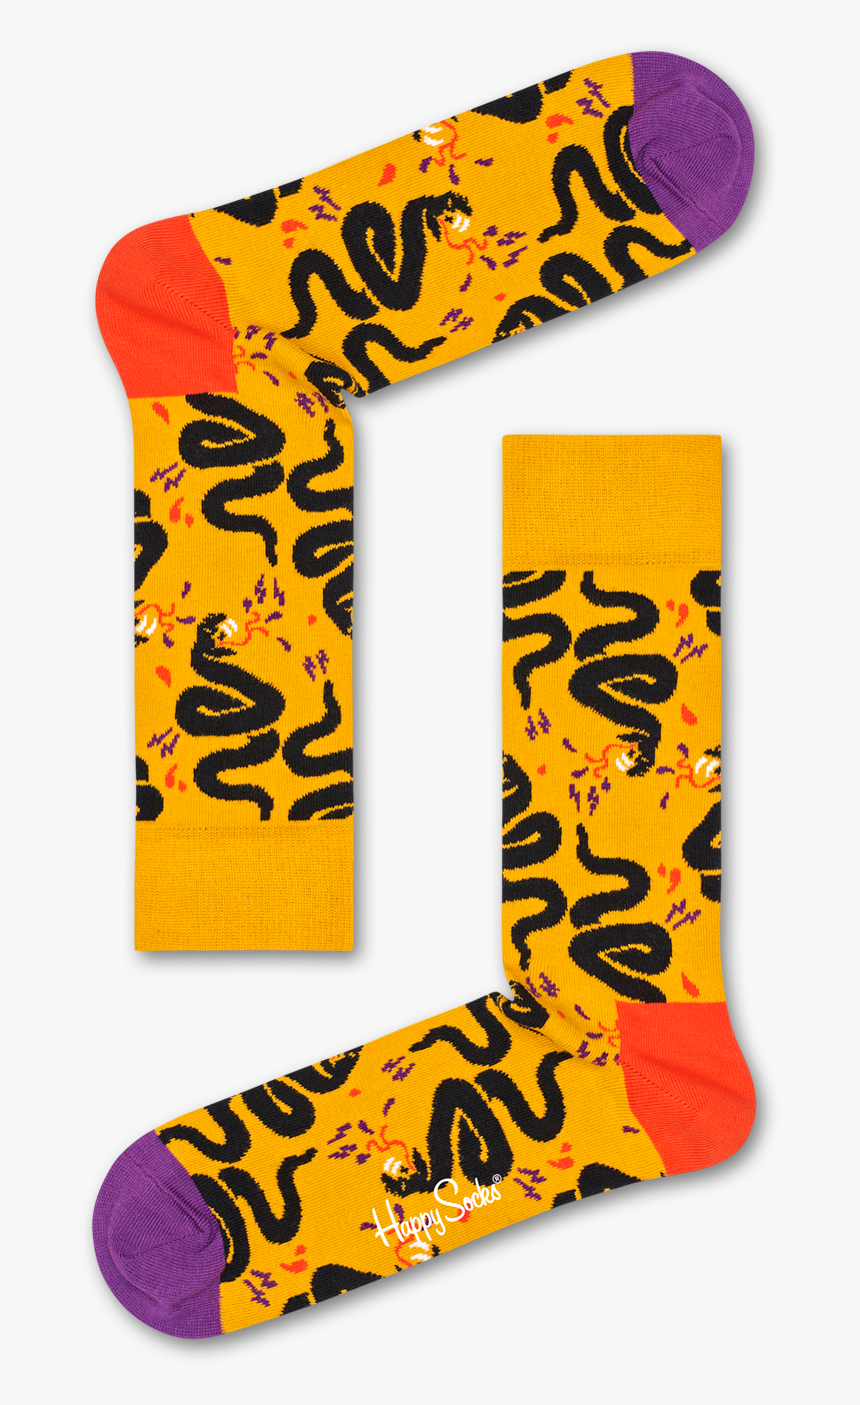 Product Image - Happy Socks Online Rolling Stones, HD Png Download, Free Download